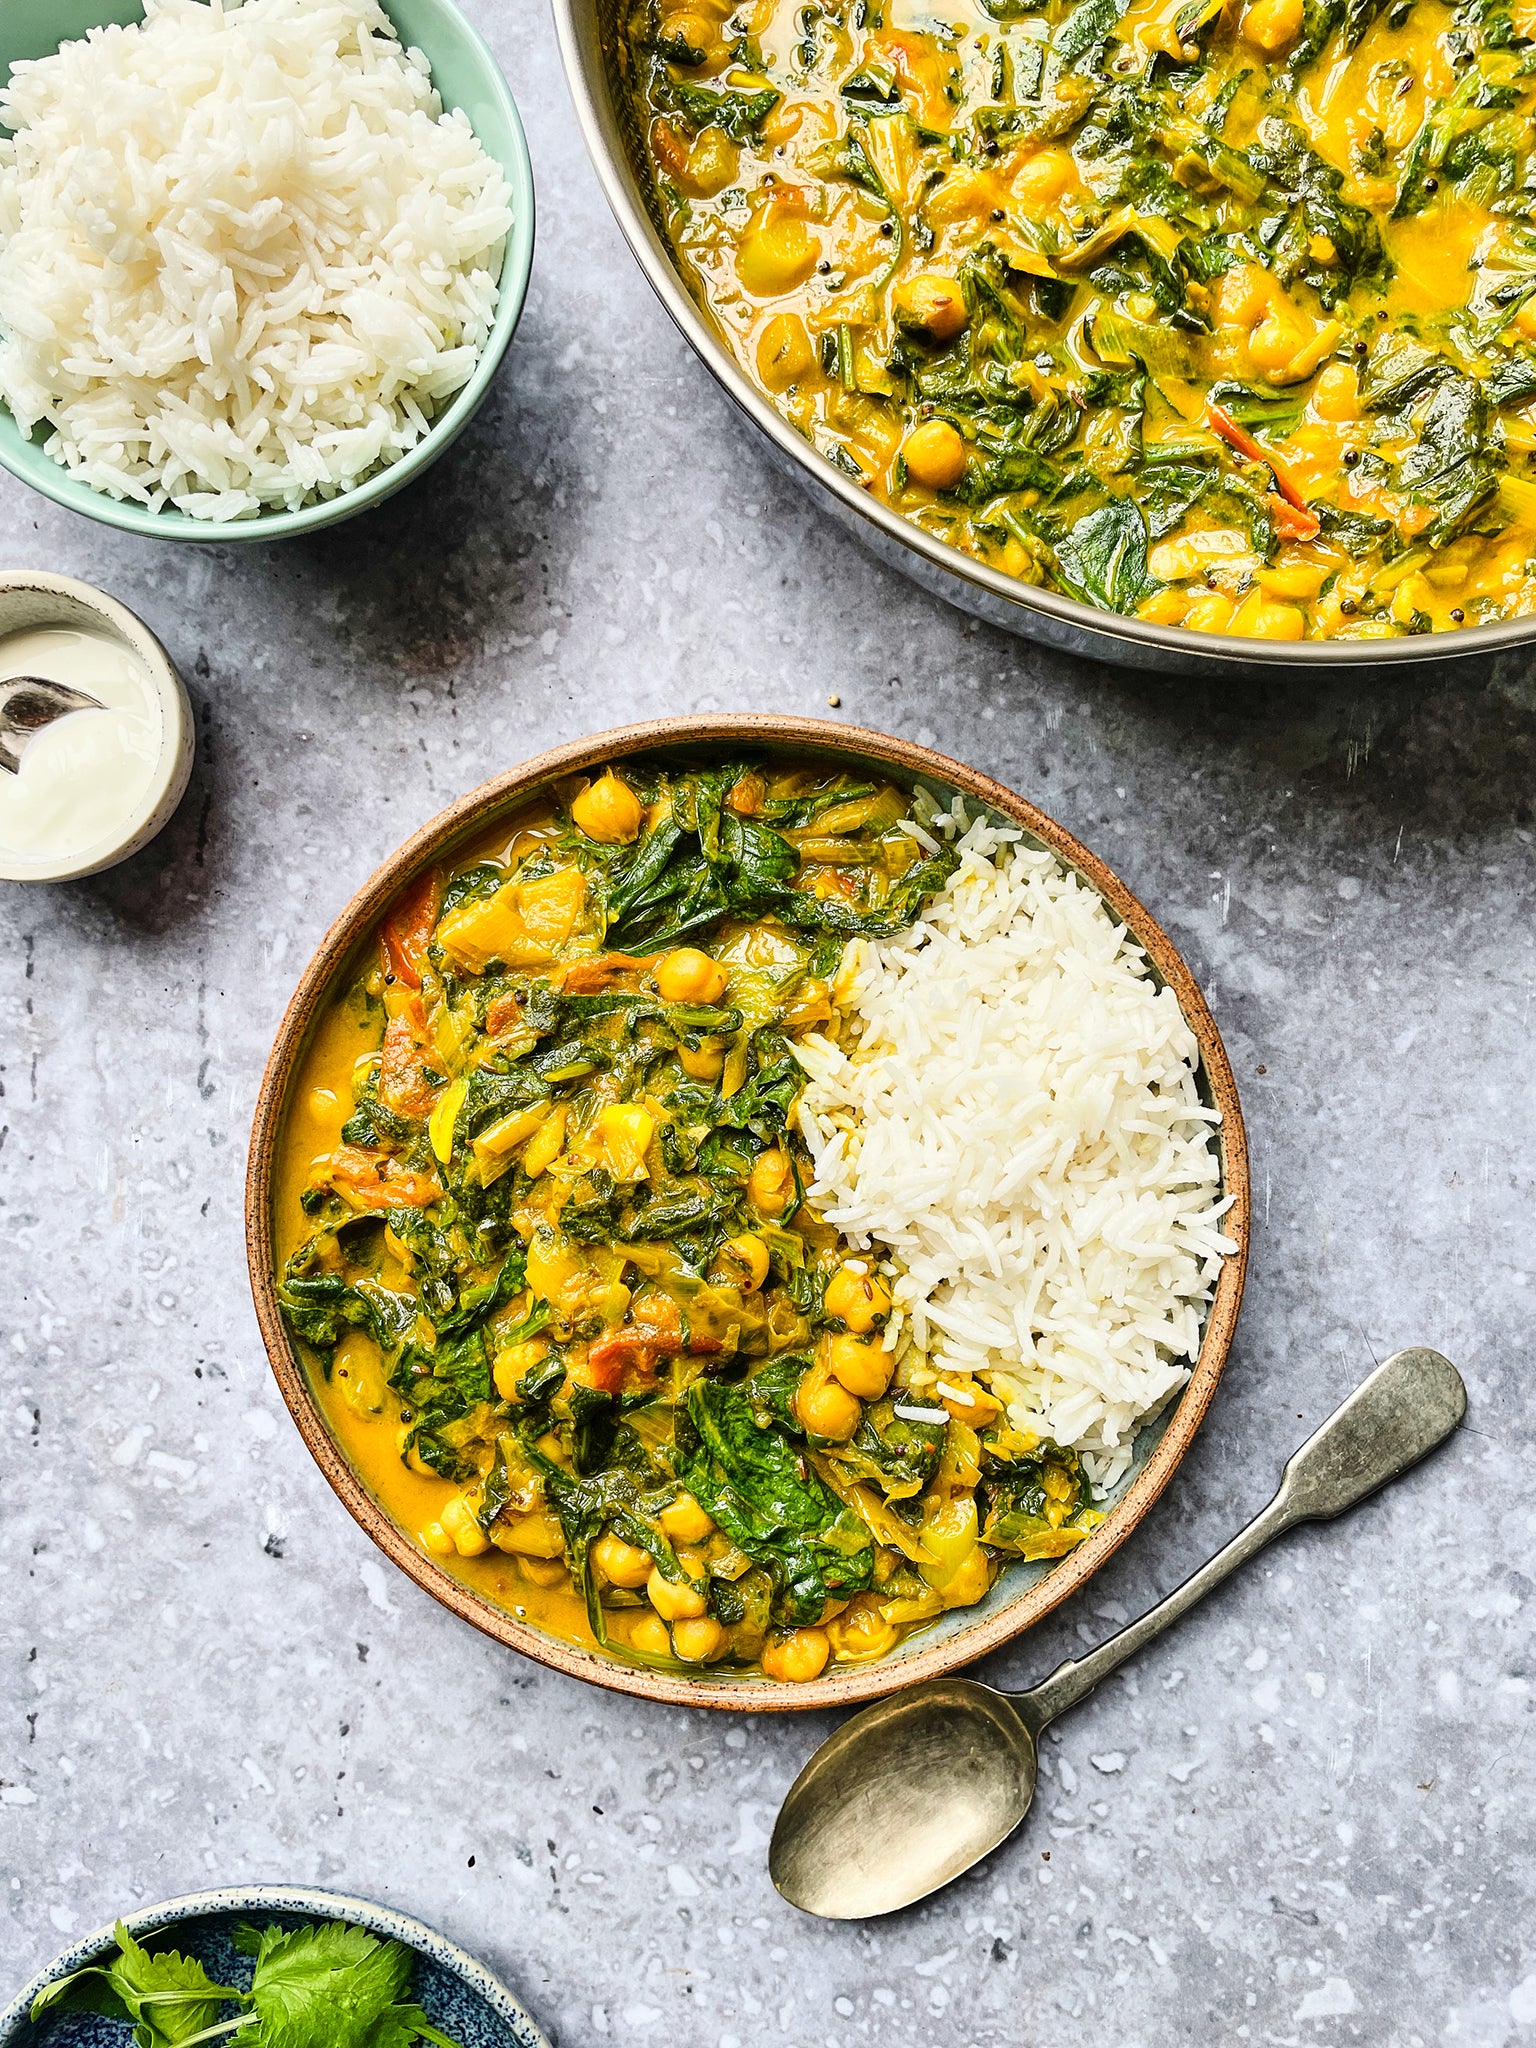 For those looking for an easy but nutritious Monday night dinner, the saag channa masala is a tasty plant-based option